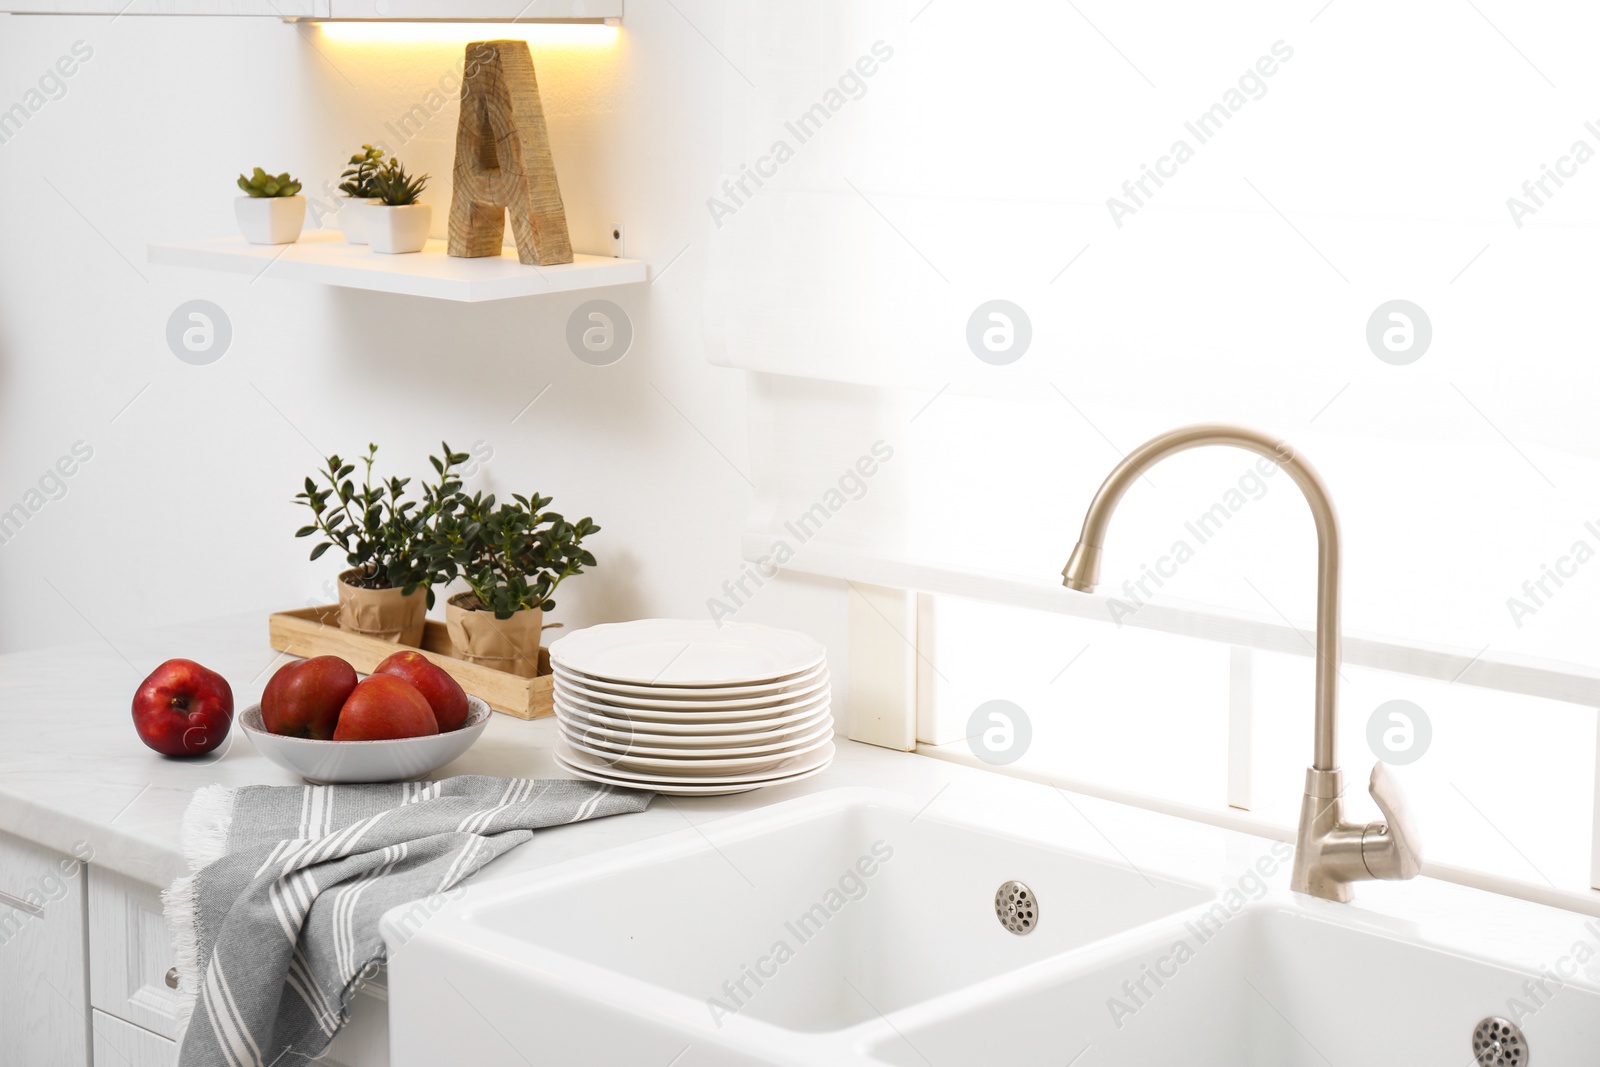 Photo of Modern kitchen interior with bowl full of ripe apples on counter